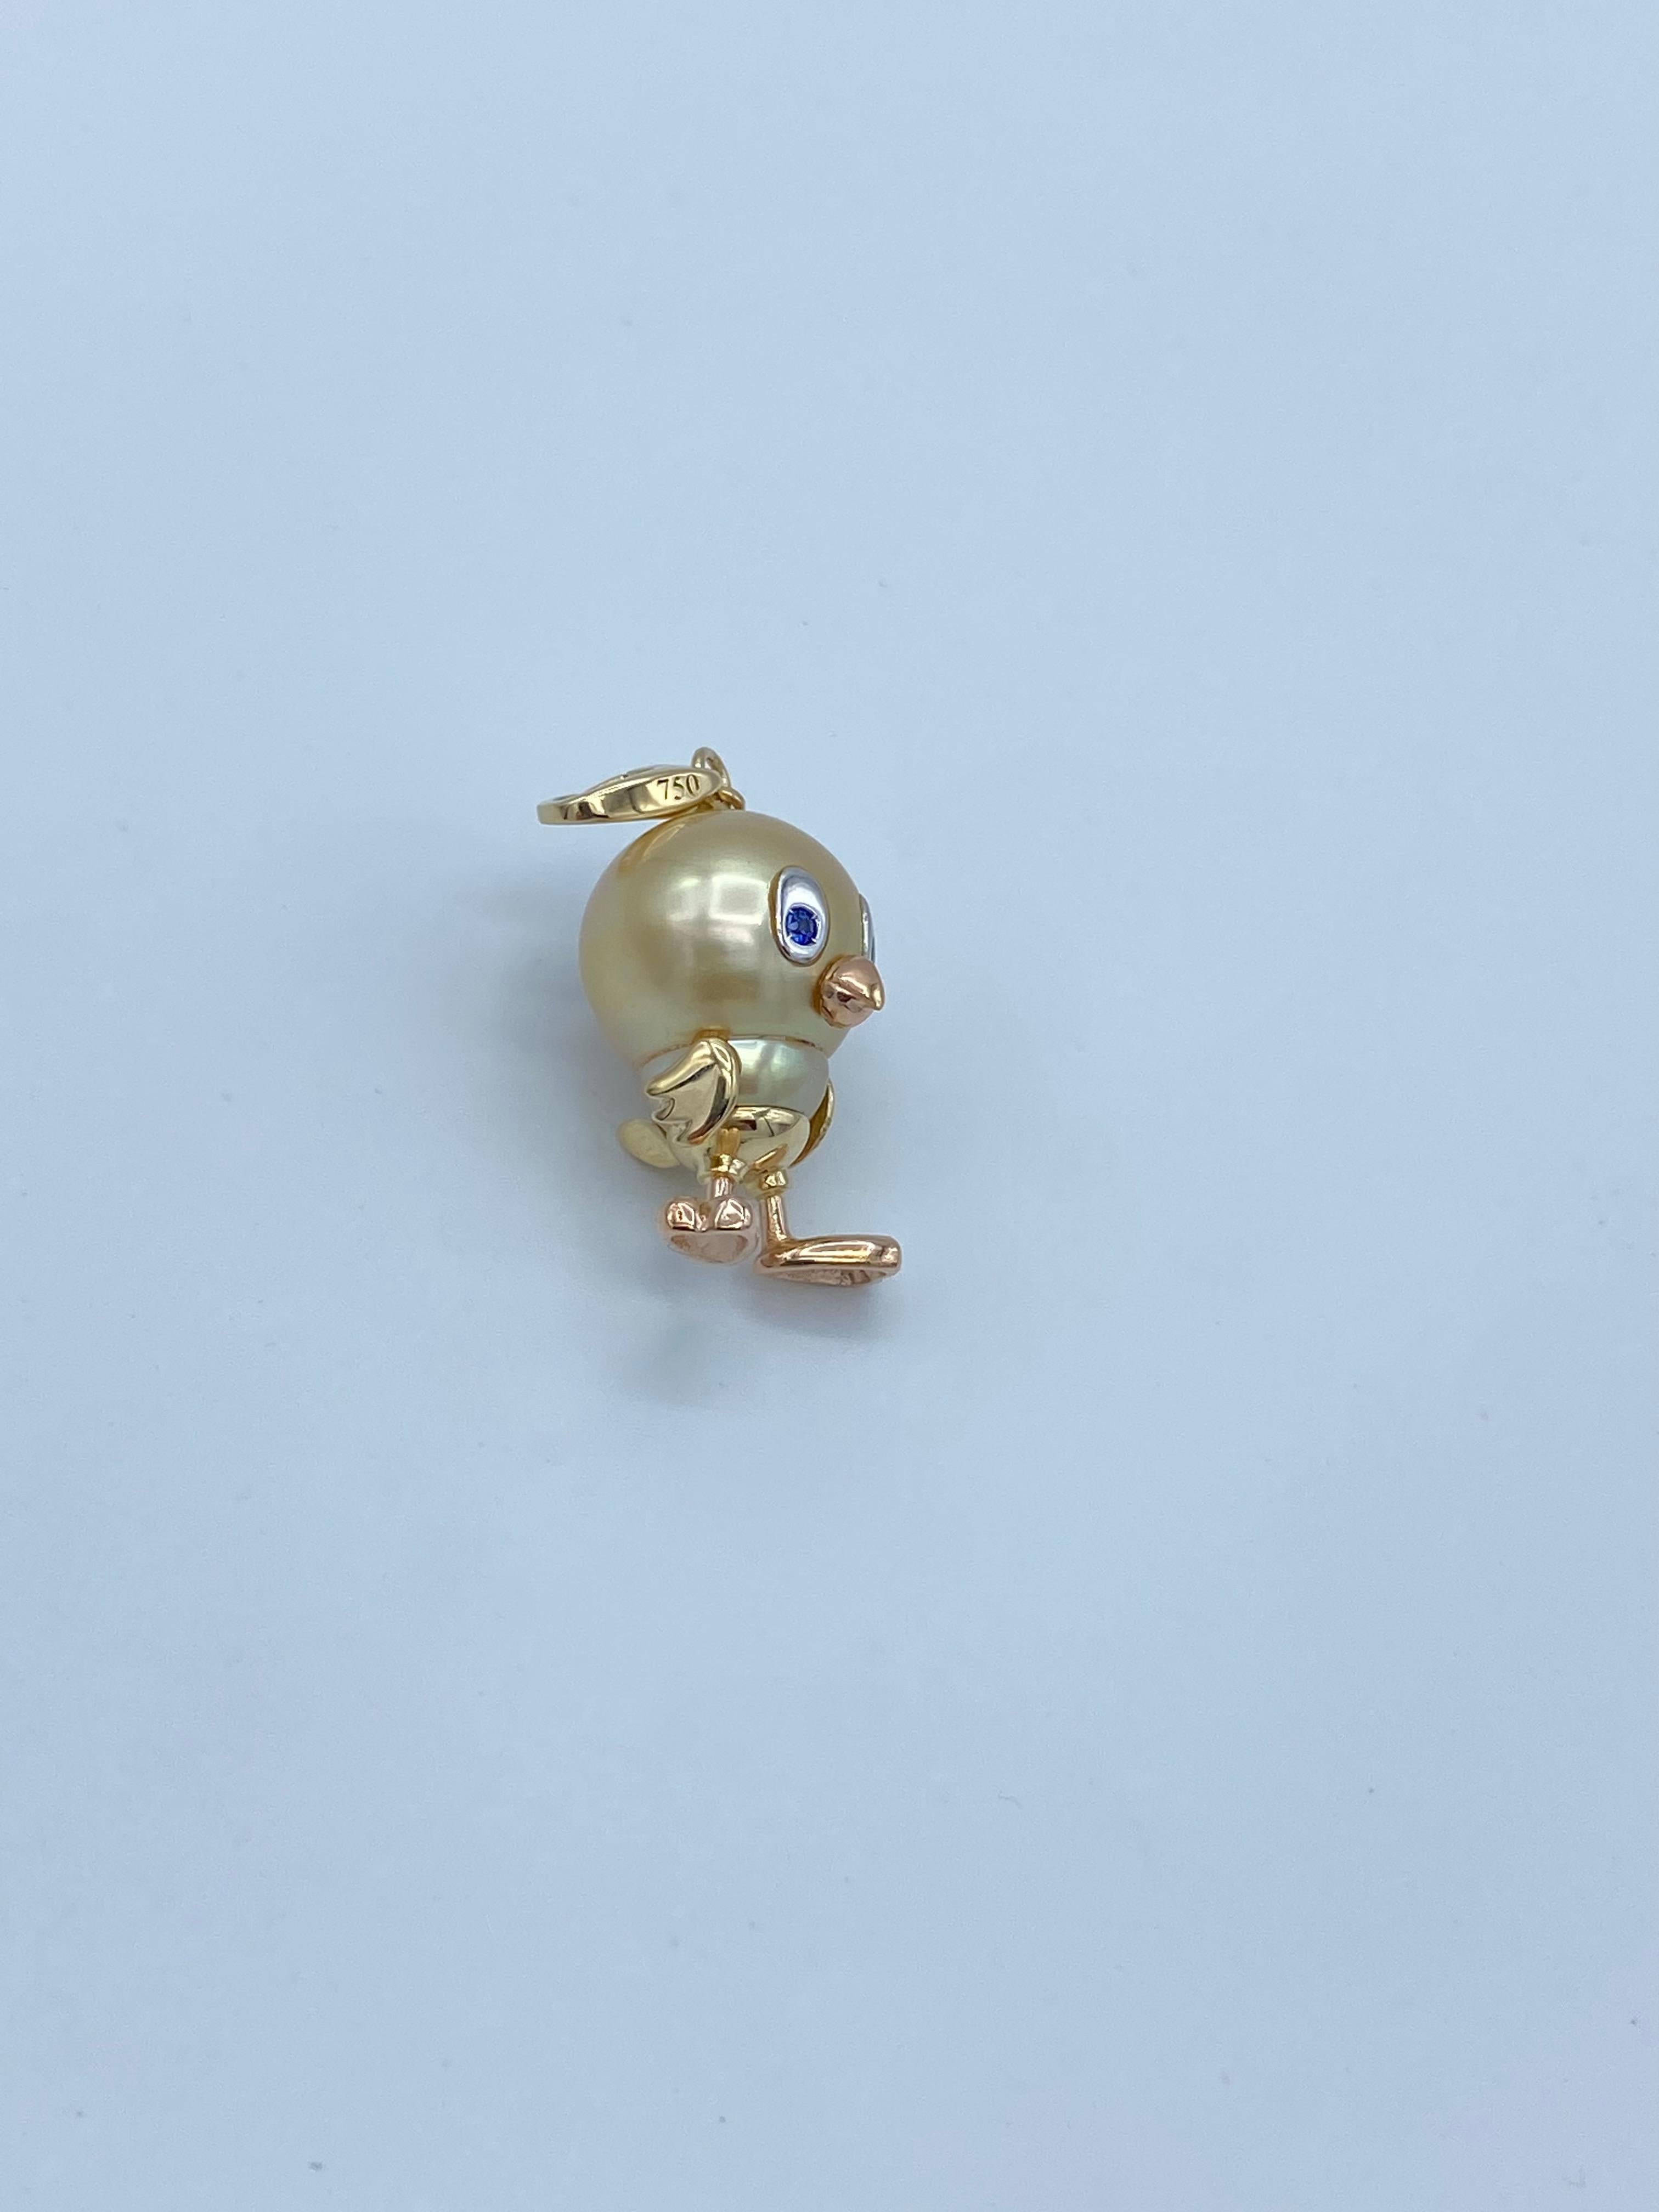 This pendant is made as if it were a caricature of a little bird, looks like Tweety.
The very beautiful Australian pearl is 16x14 mm.
The eyes set on white gold, are blue sapphires.
The legs and the beak are in pink gold, the other elements are in